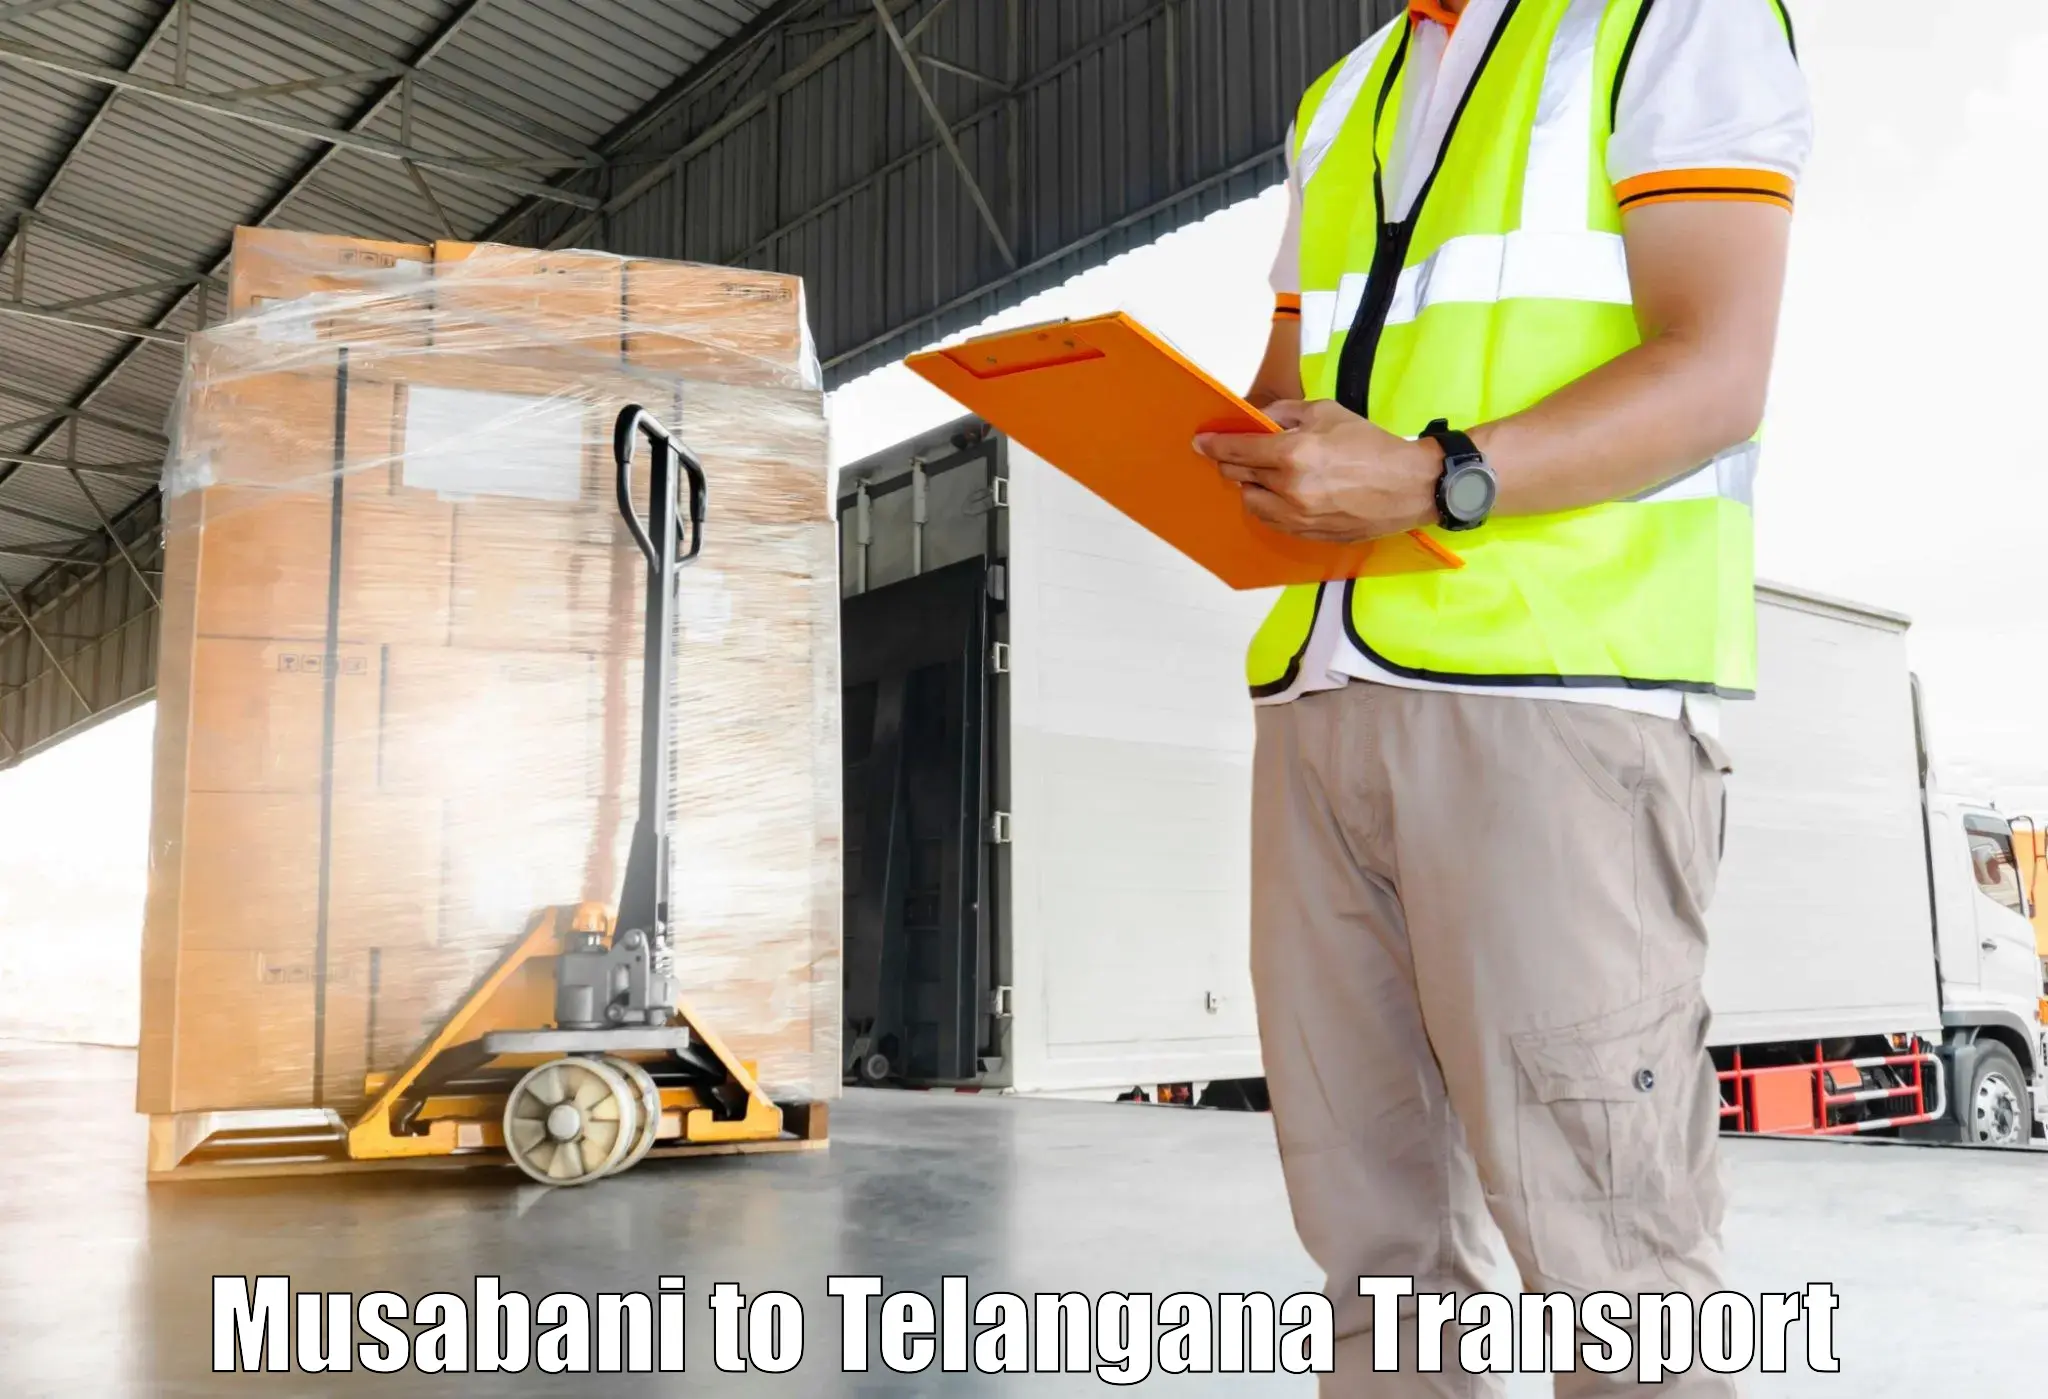 Air freight transport services in Musabani to Adilabad